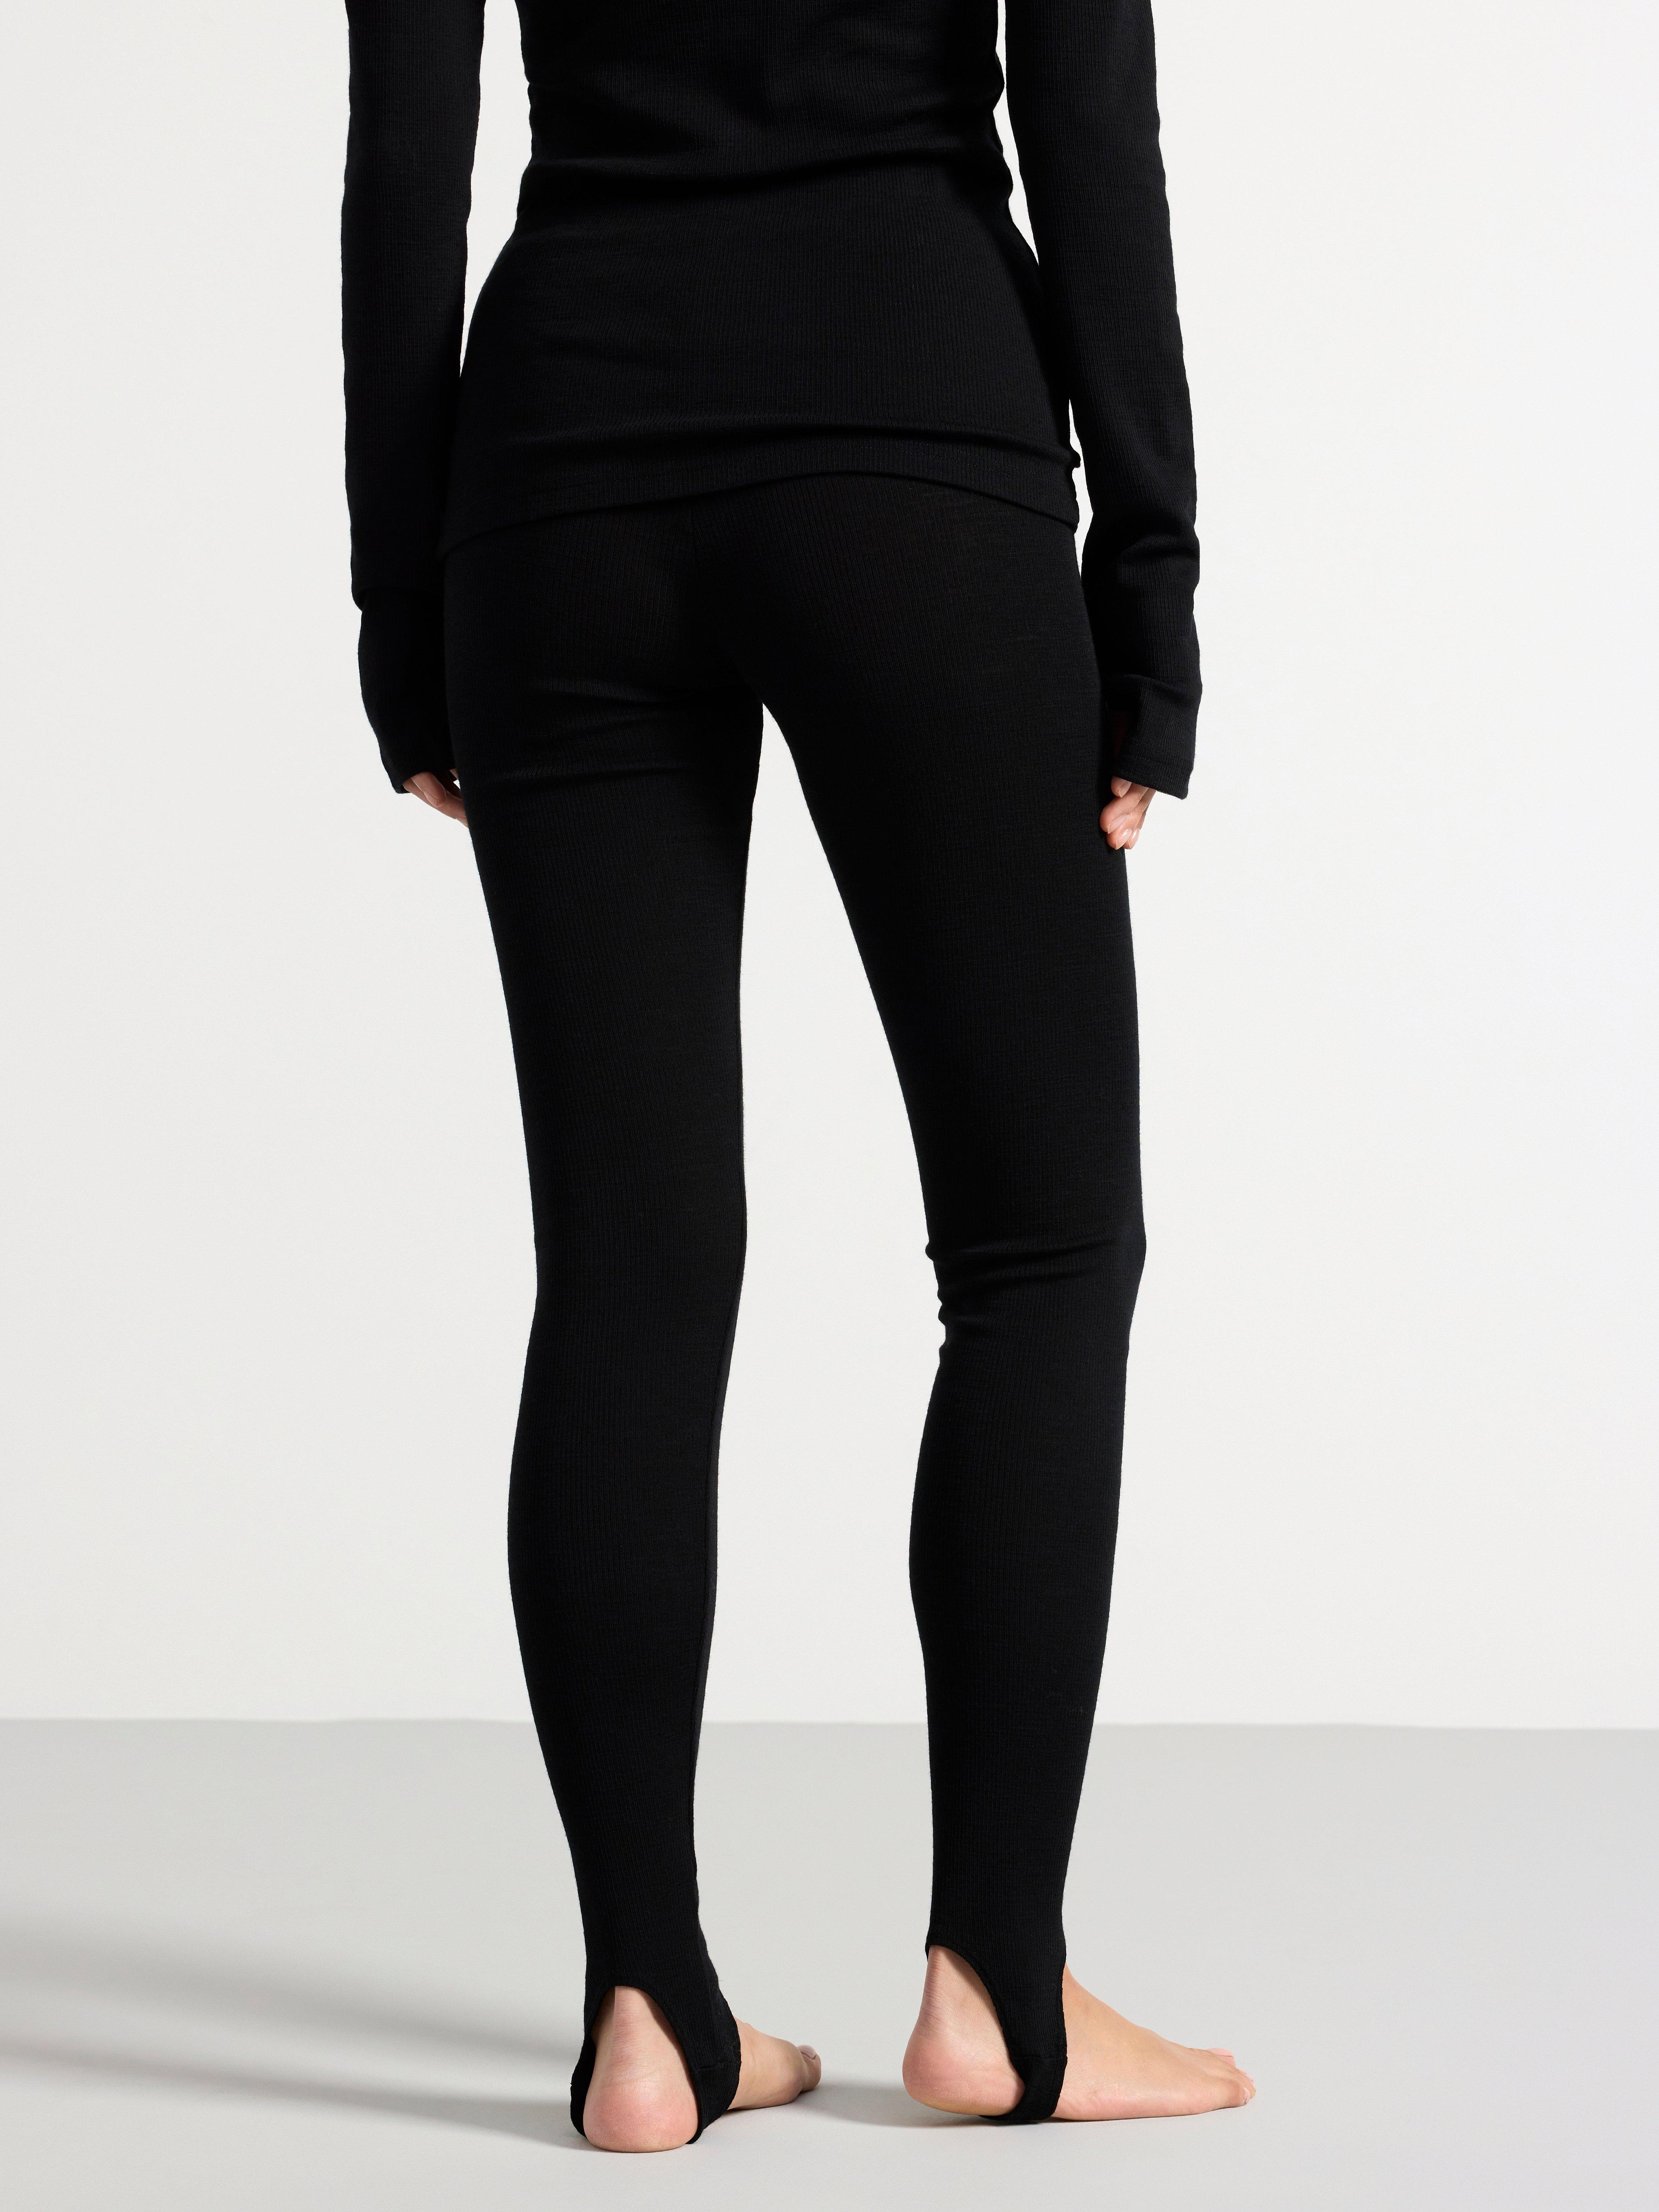 Black Ribbed Leggings With Lace Up Detail  Formal pants women, Cute  leggings, Sporty outfits